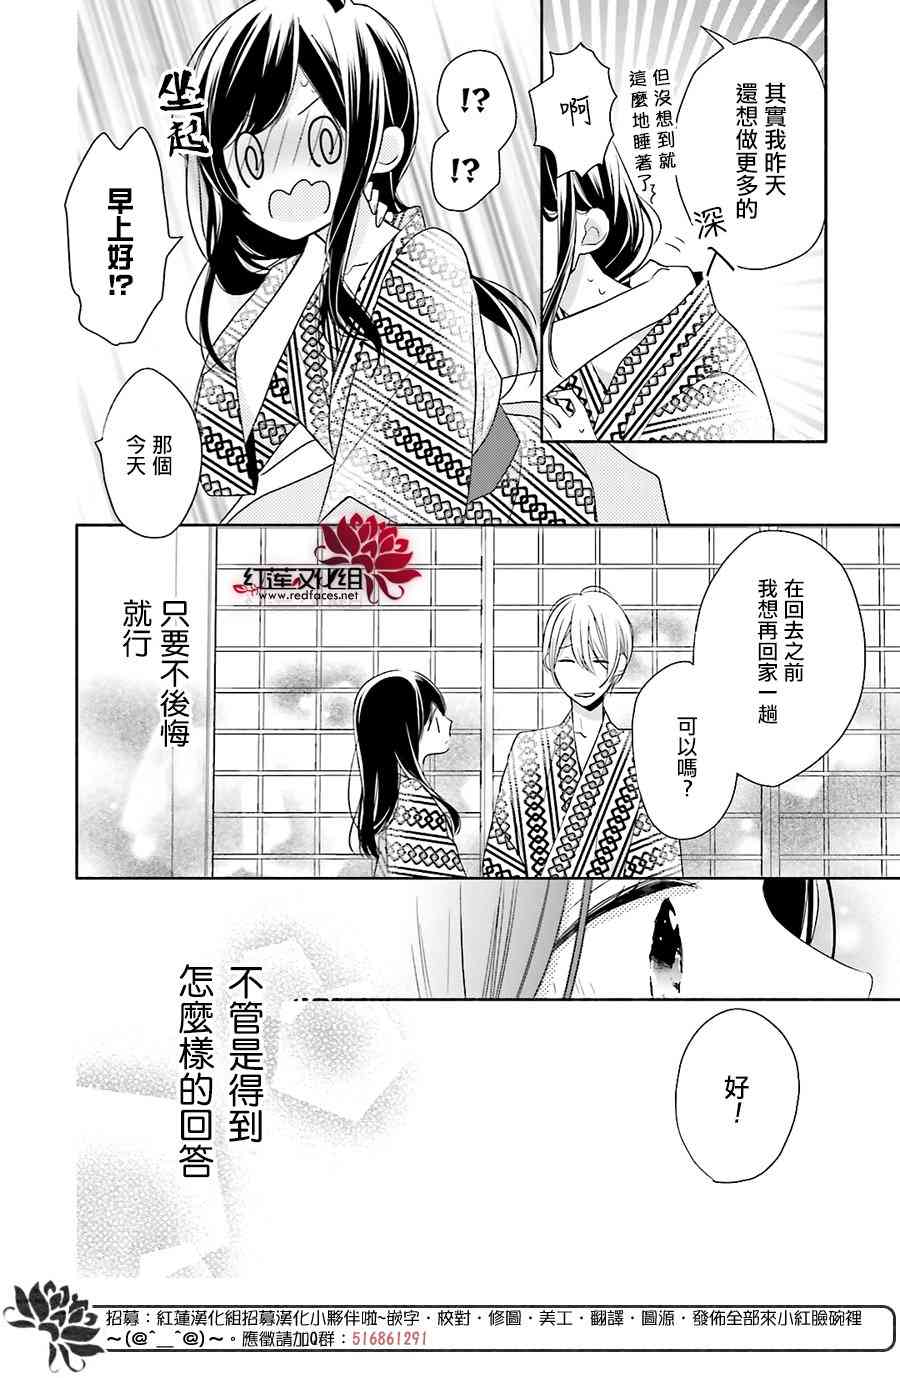 If given a second chance - 12話 - 7